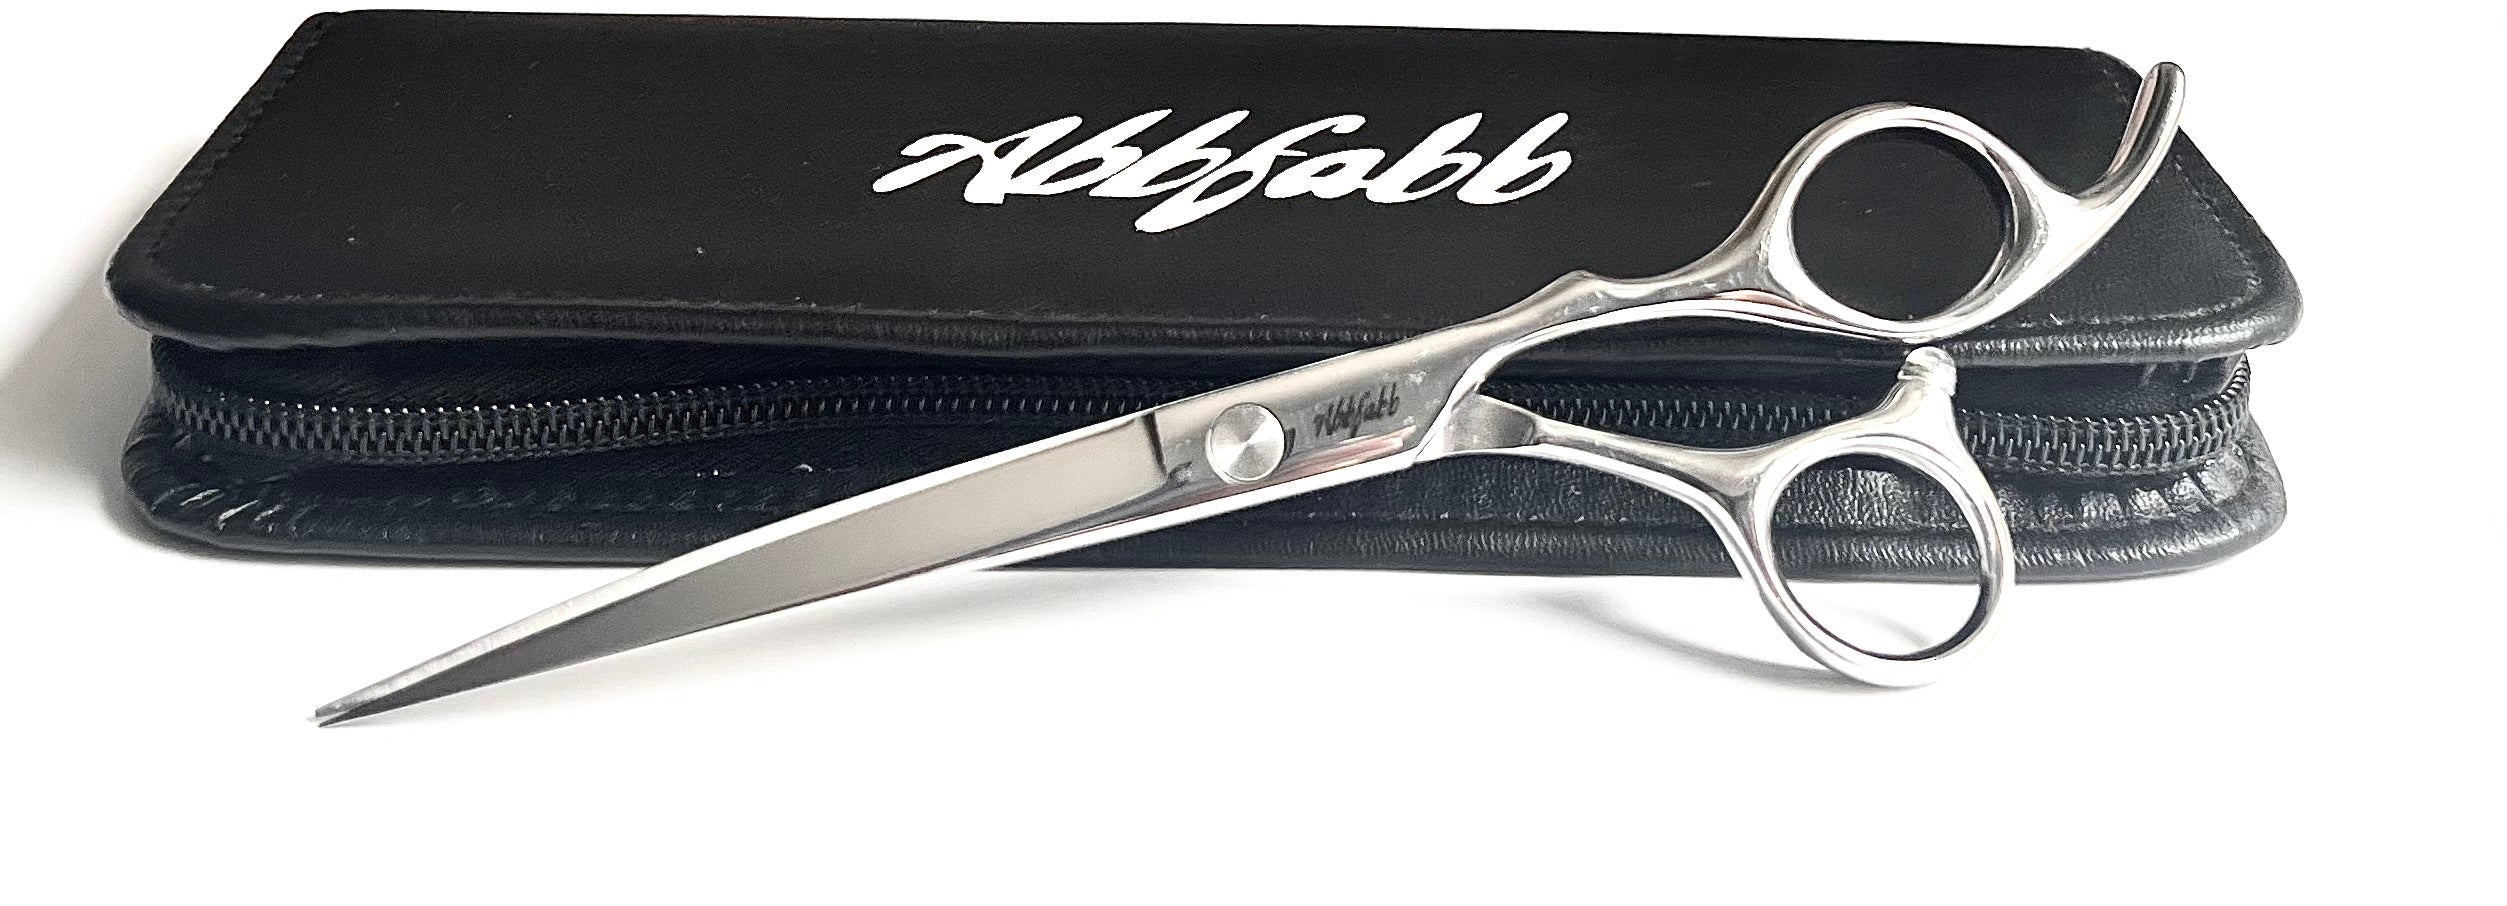 6.5" Curved Dog Grooming Scissor with Pinpoint Tip by Abbfabb Grooming Scissors Ltd